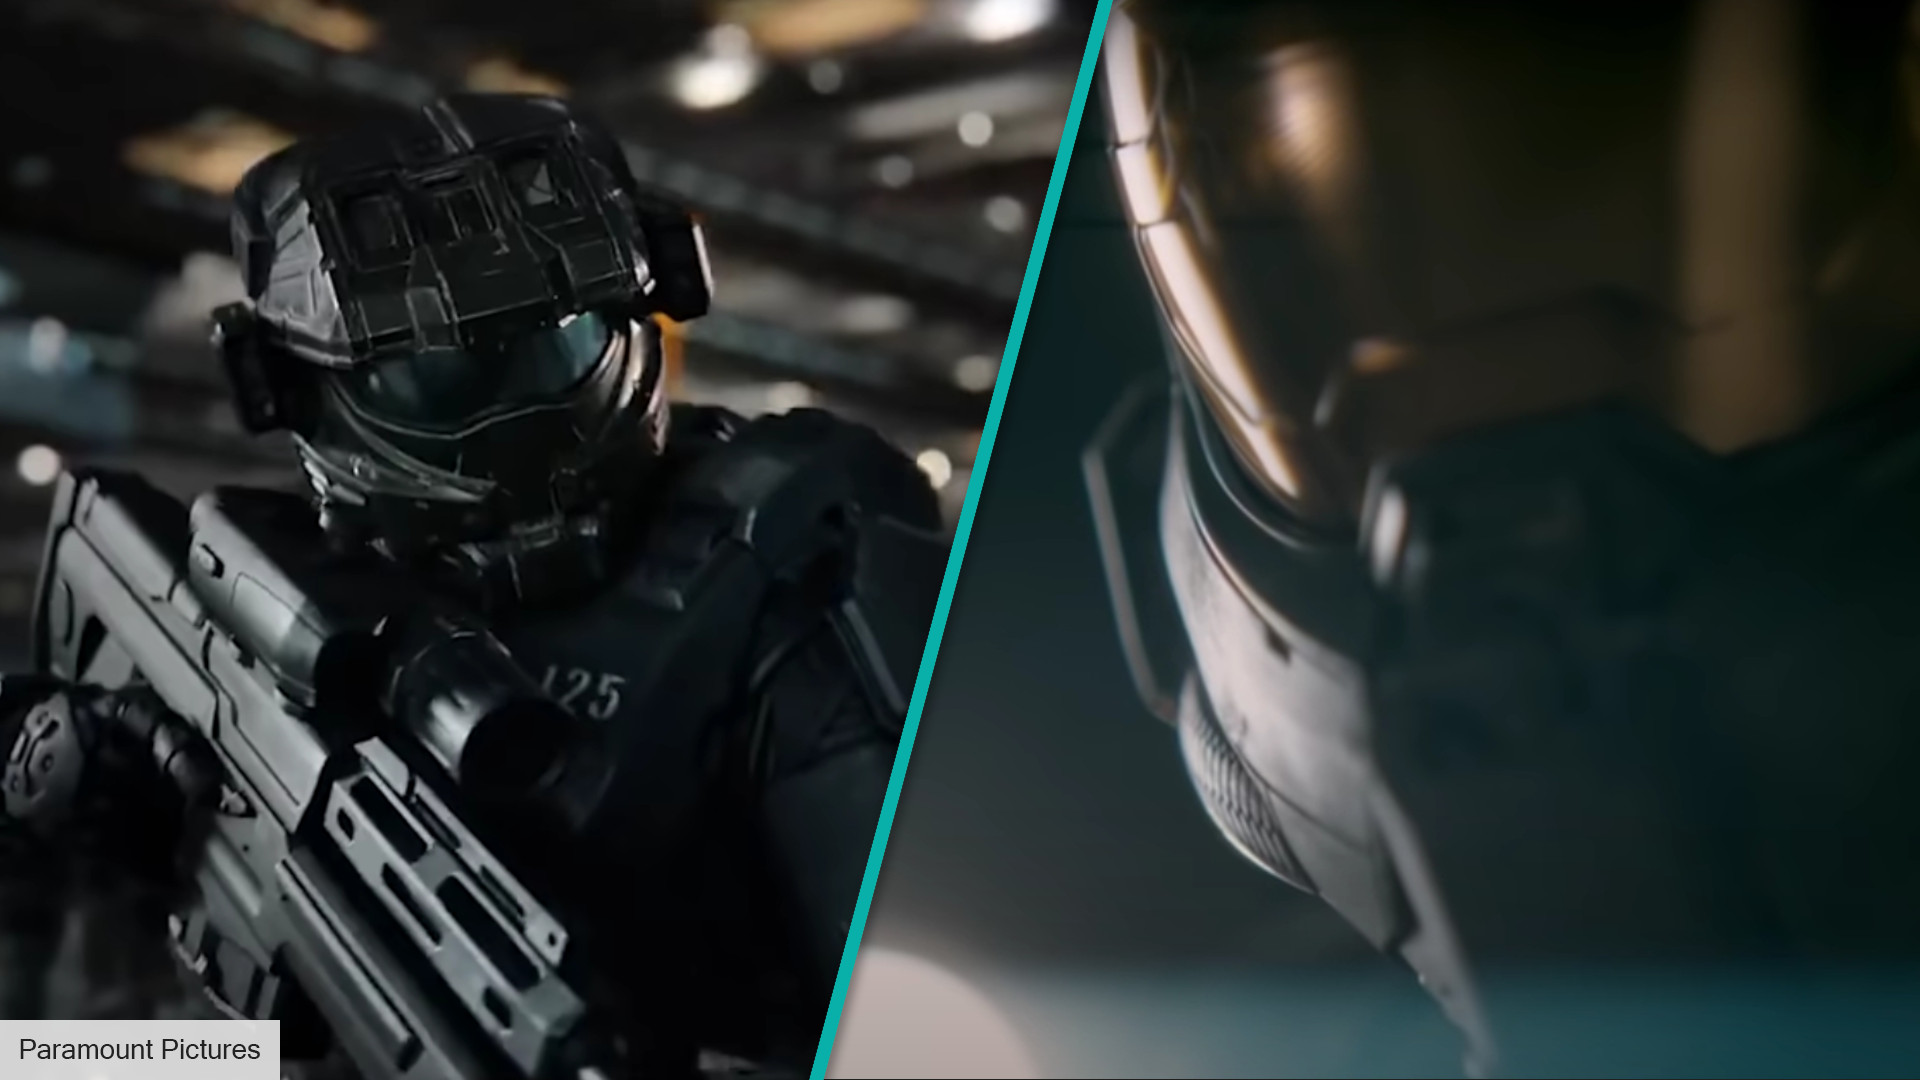 Check out the trailer for the new Halo TV Series